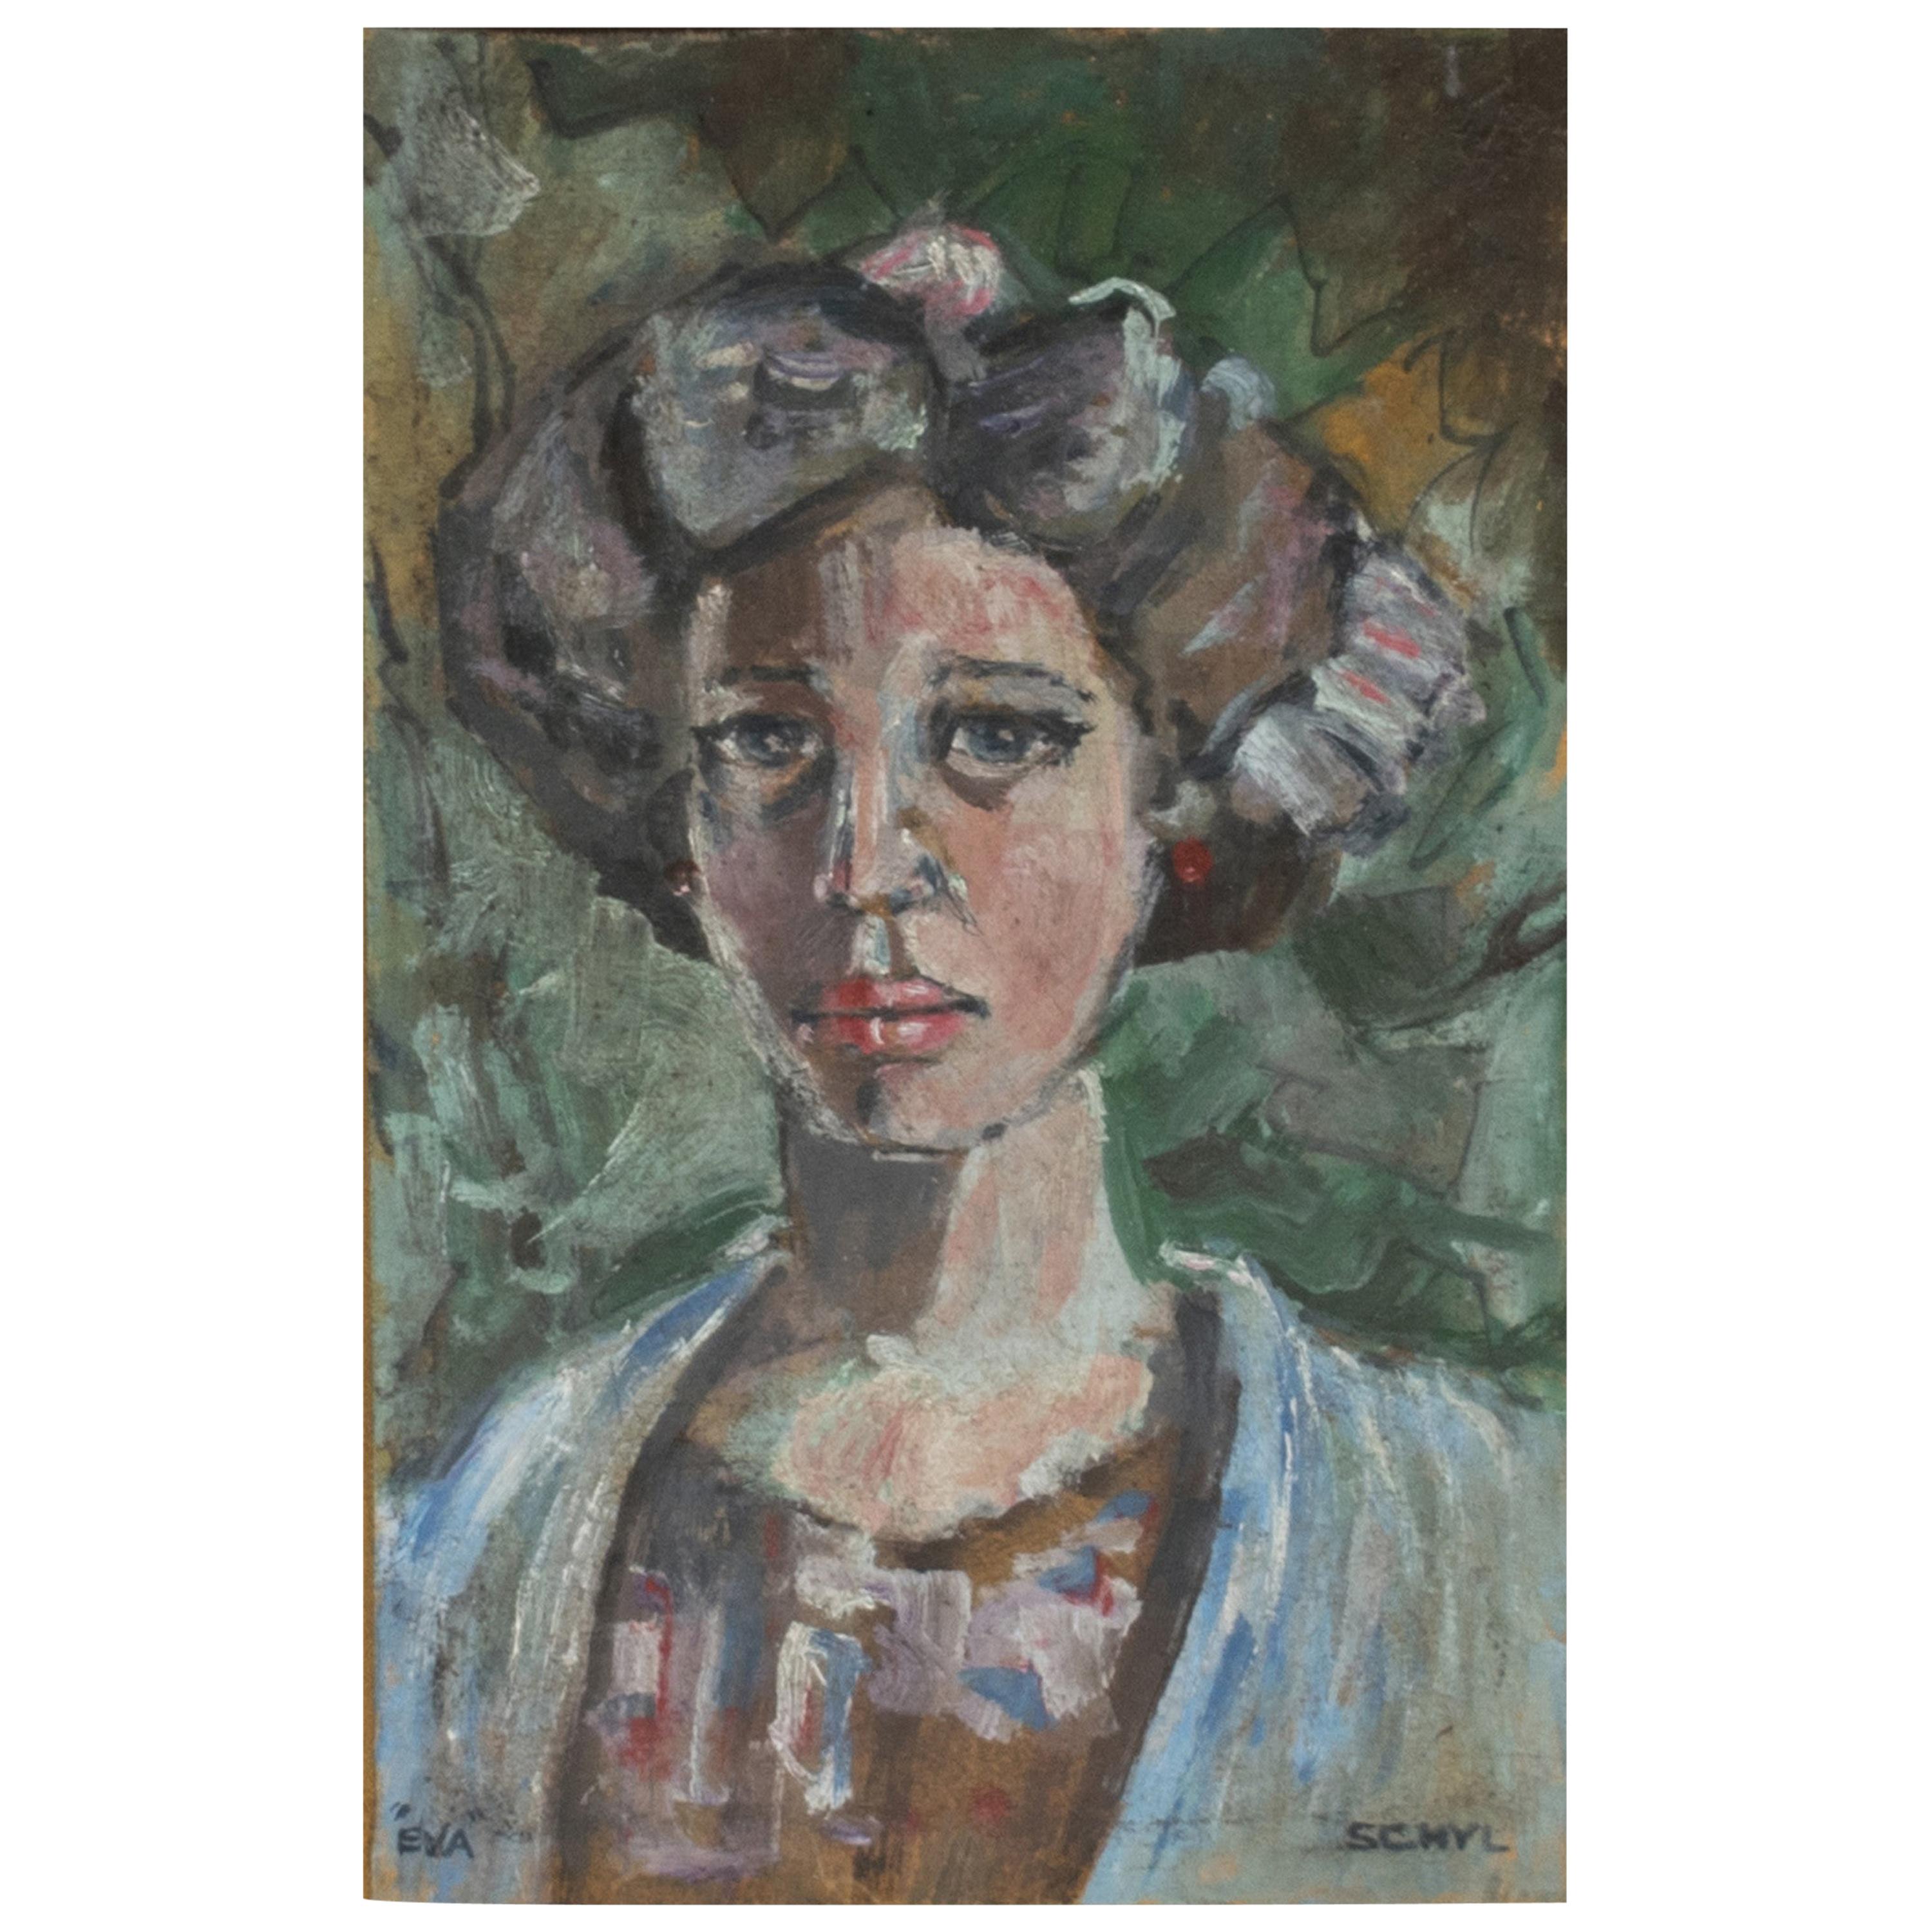 Julius Schyl, Small Painting of a Woman, "Eva"